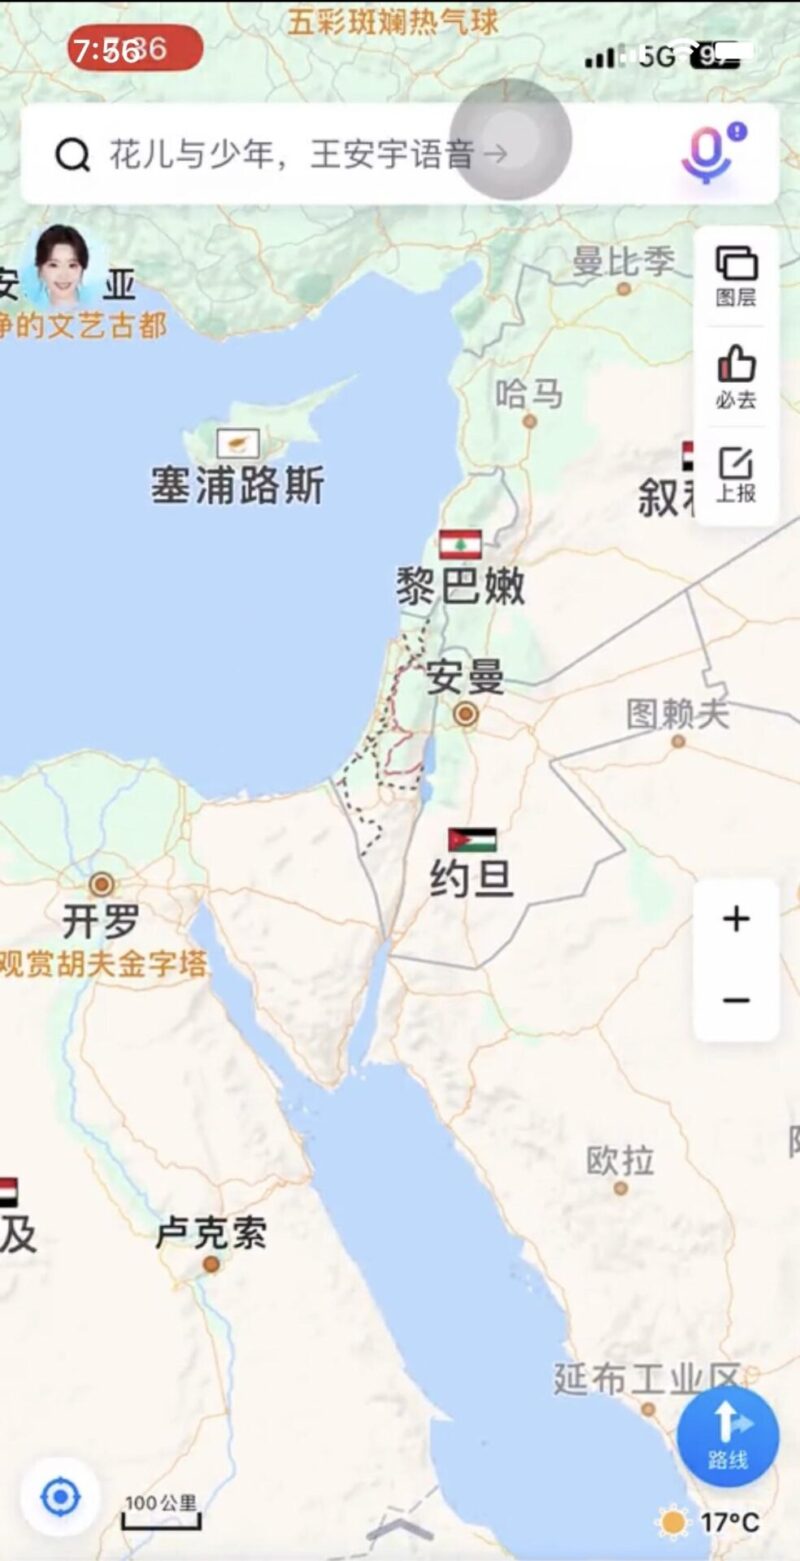 China Deletes Israel From Online Maps 2 800x1561 